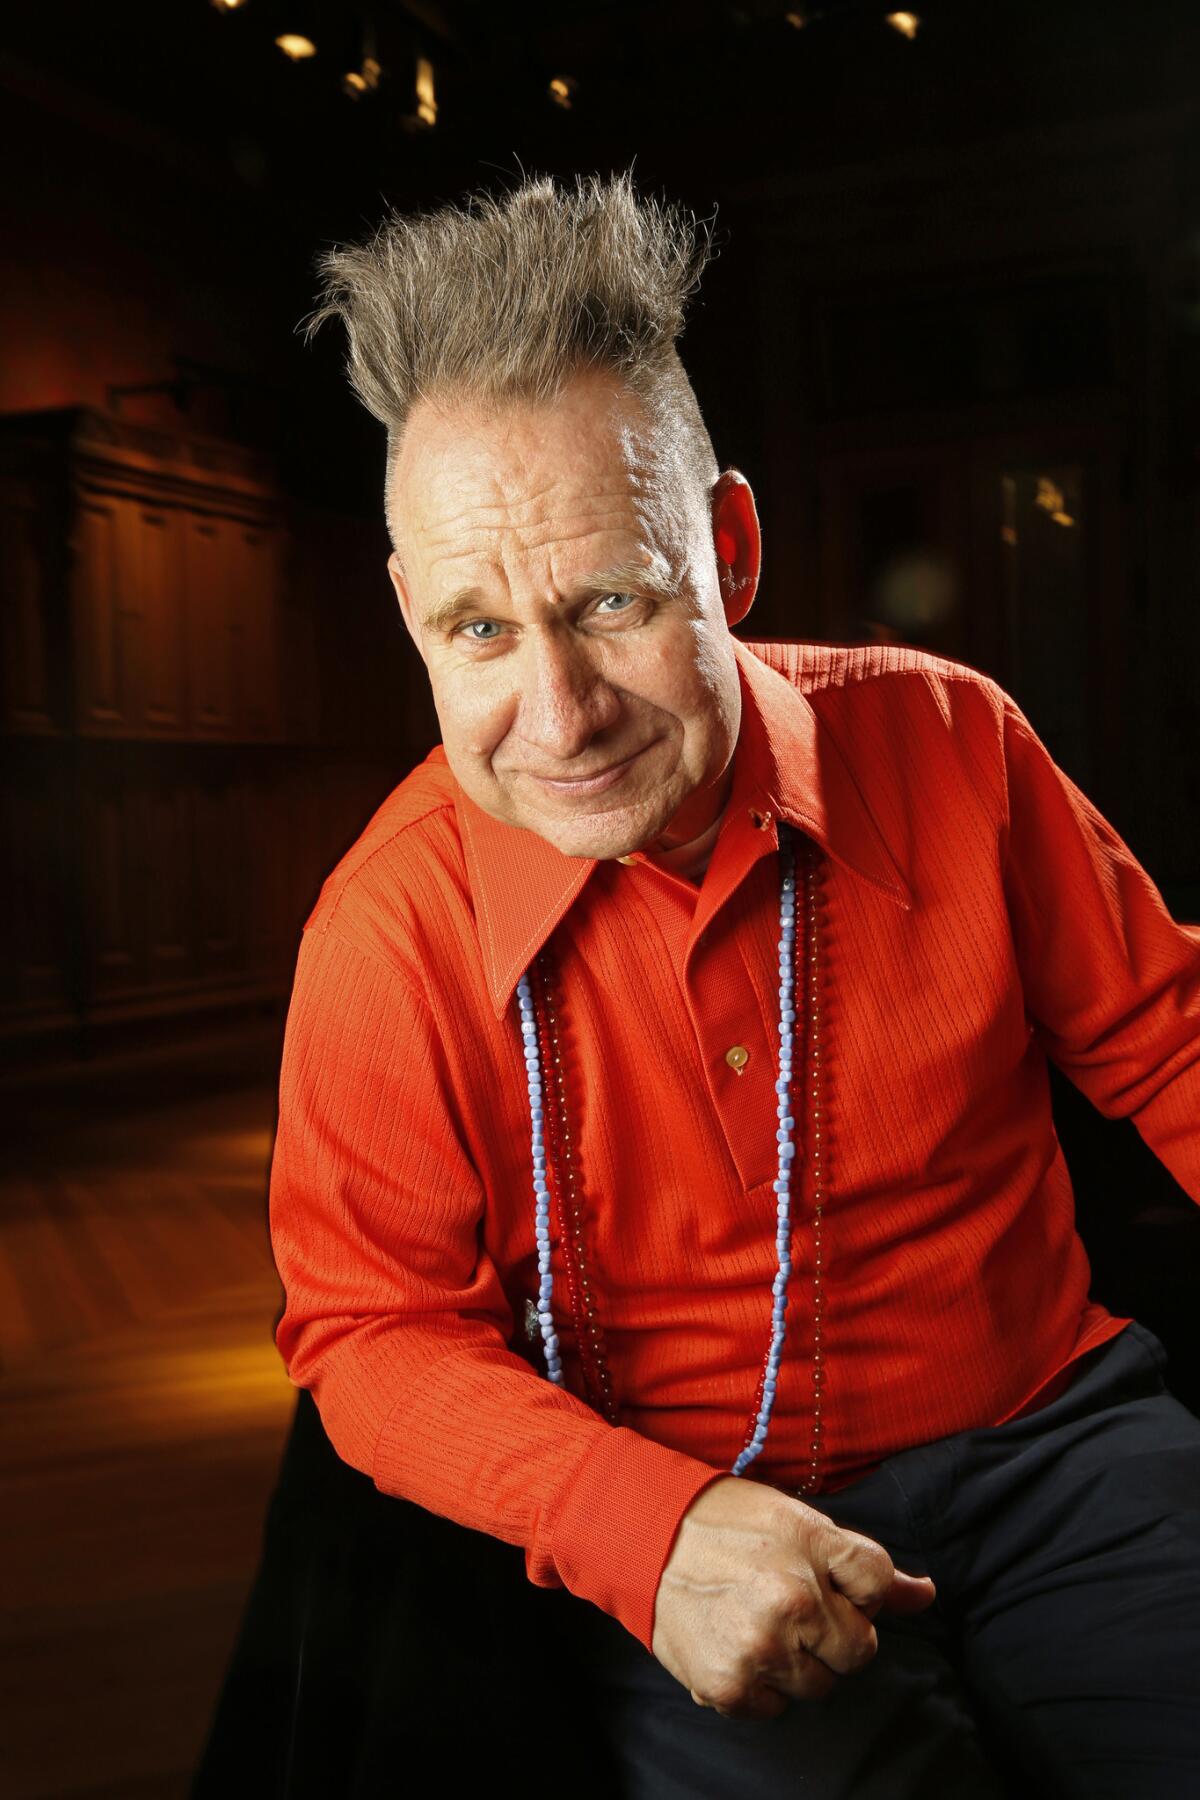 Beyond the Ojai festival, Peter Sellars is also serving as artist in residence for the Berlin Philharmonic and developing a new opera with John Adams about the California Gold Rush. (Carolyn Cole / Los Angeles Times)